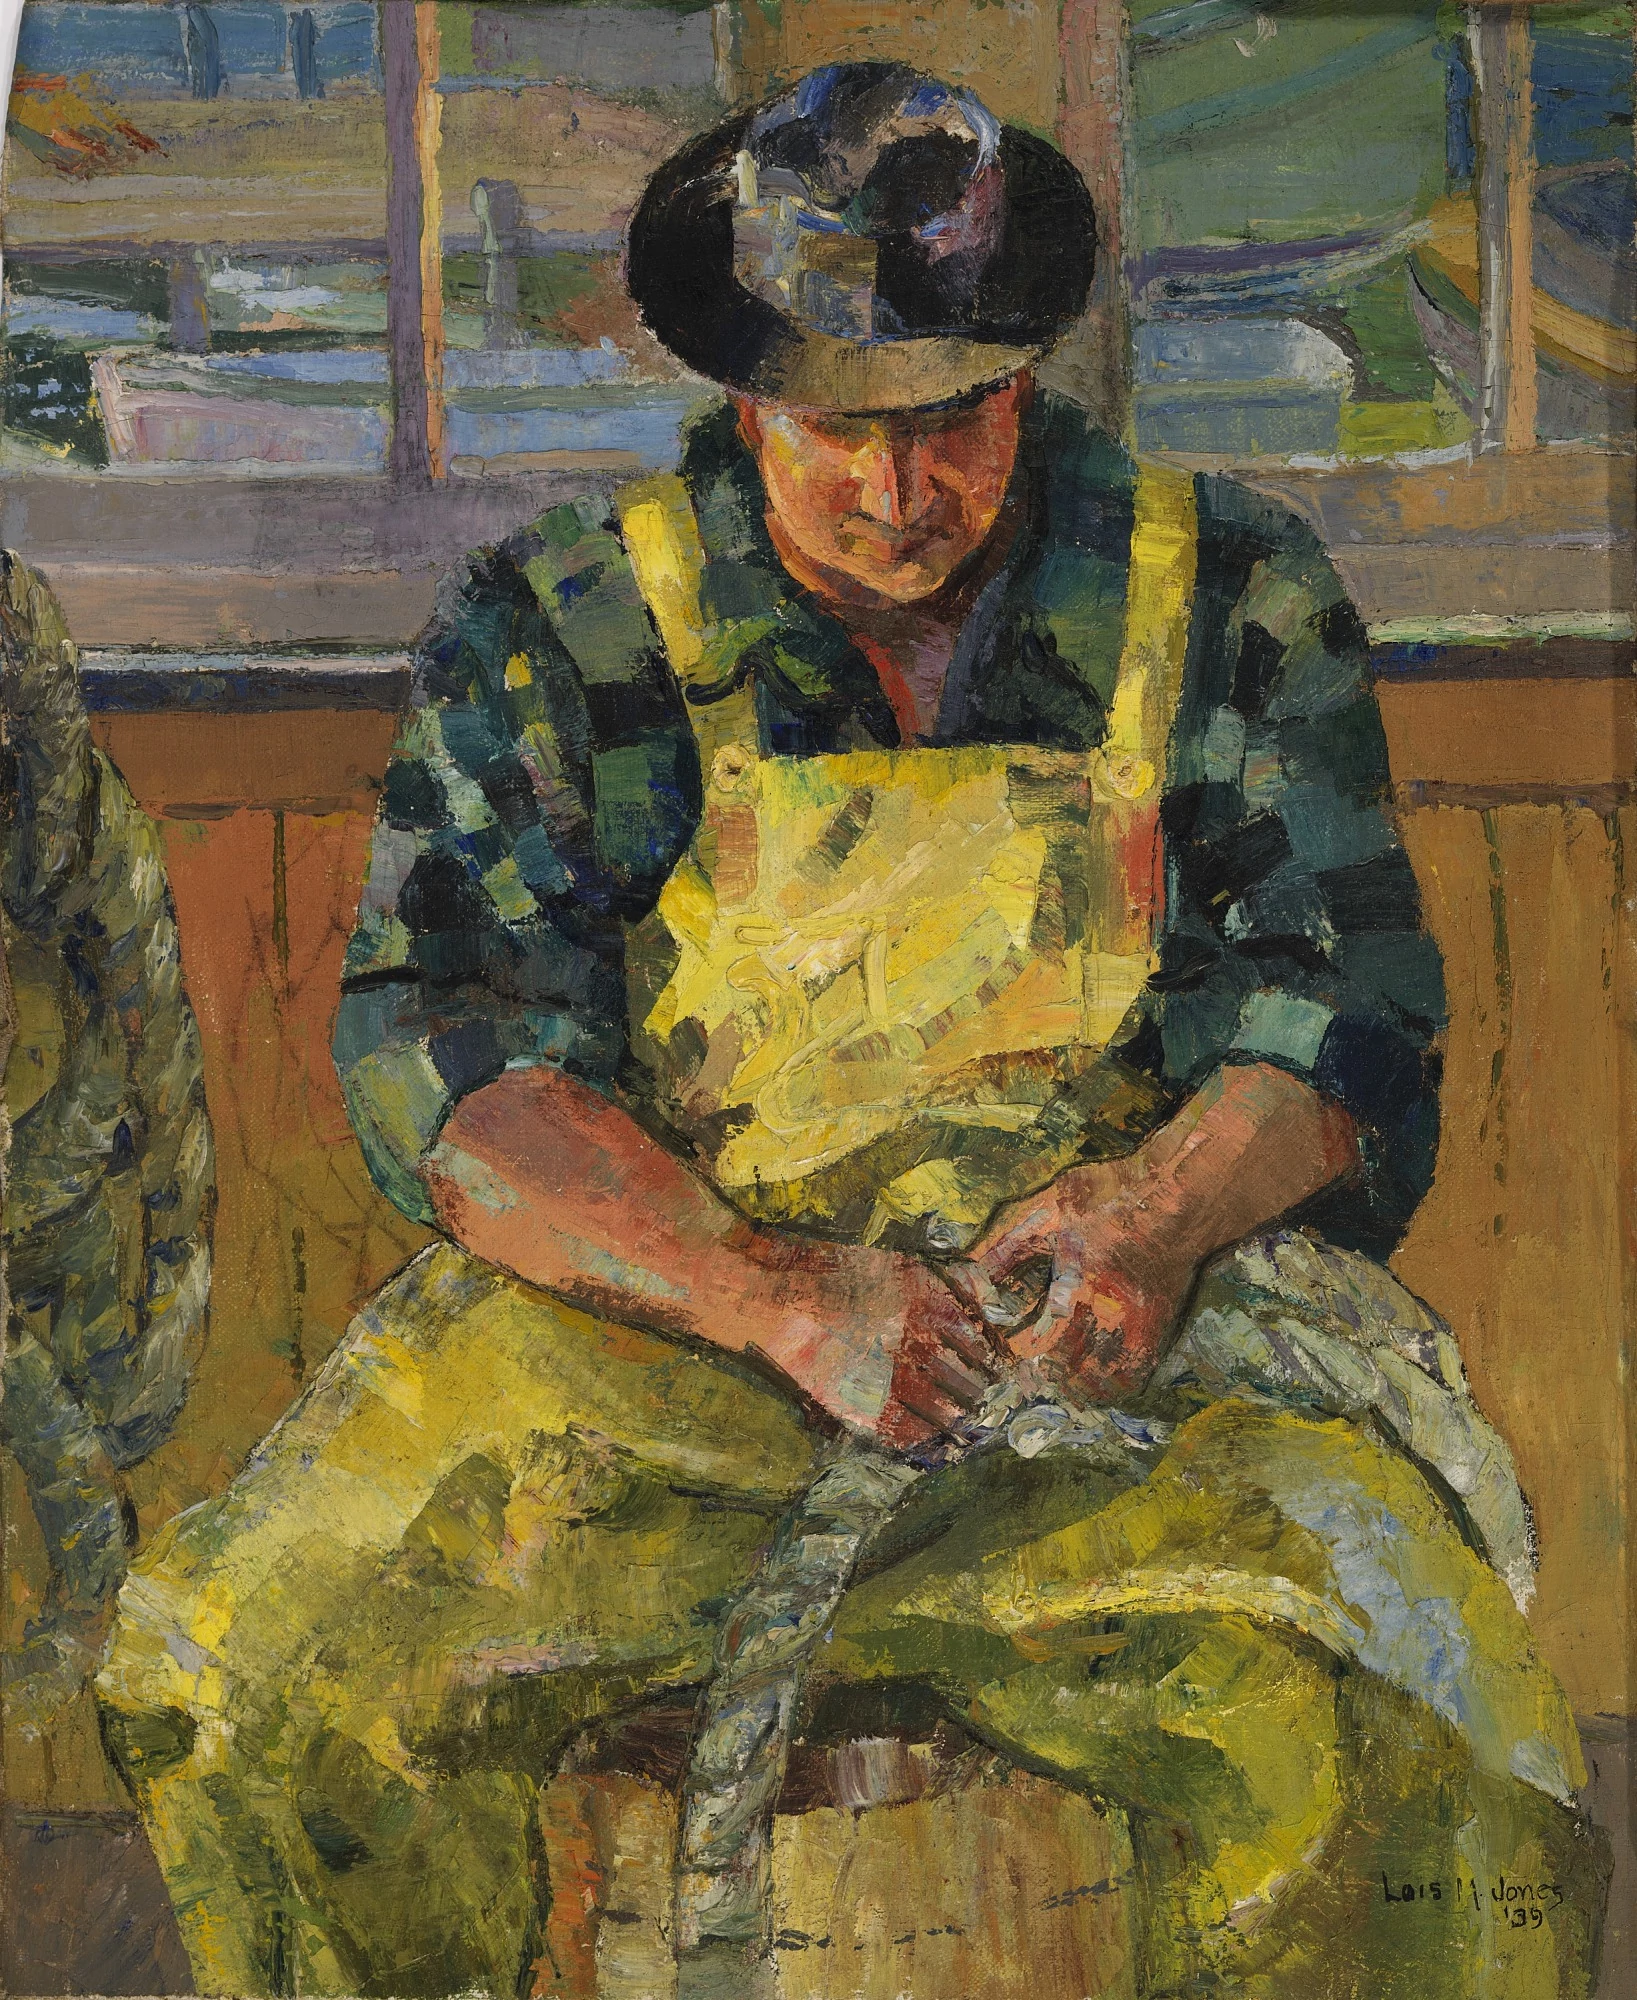 Seated Man in Yellow Overalls, Loïs Mailou Jones